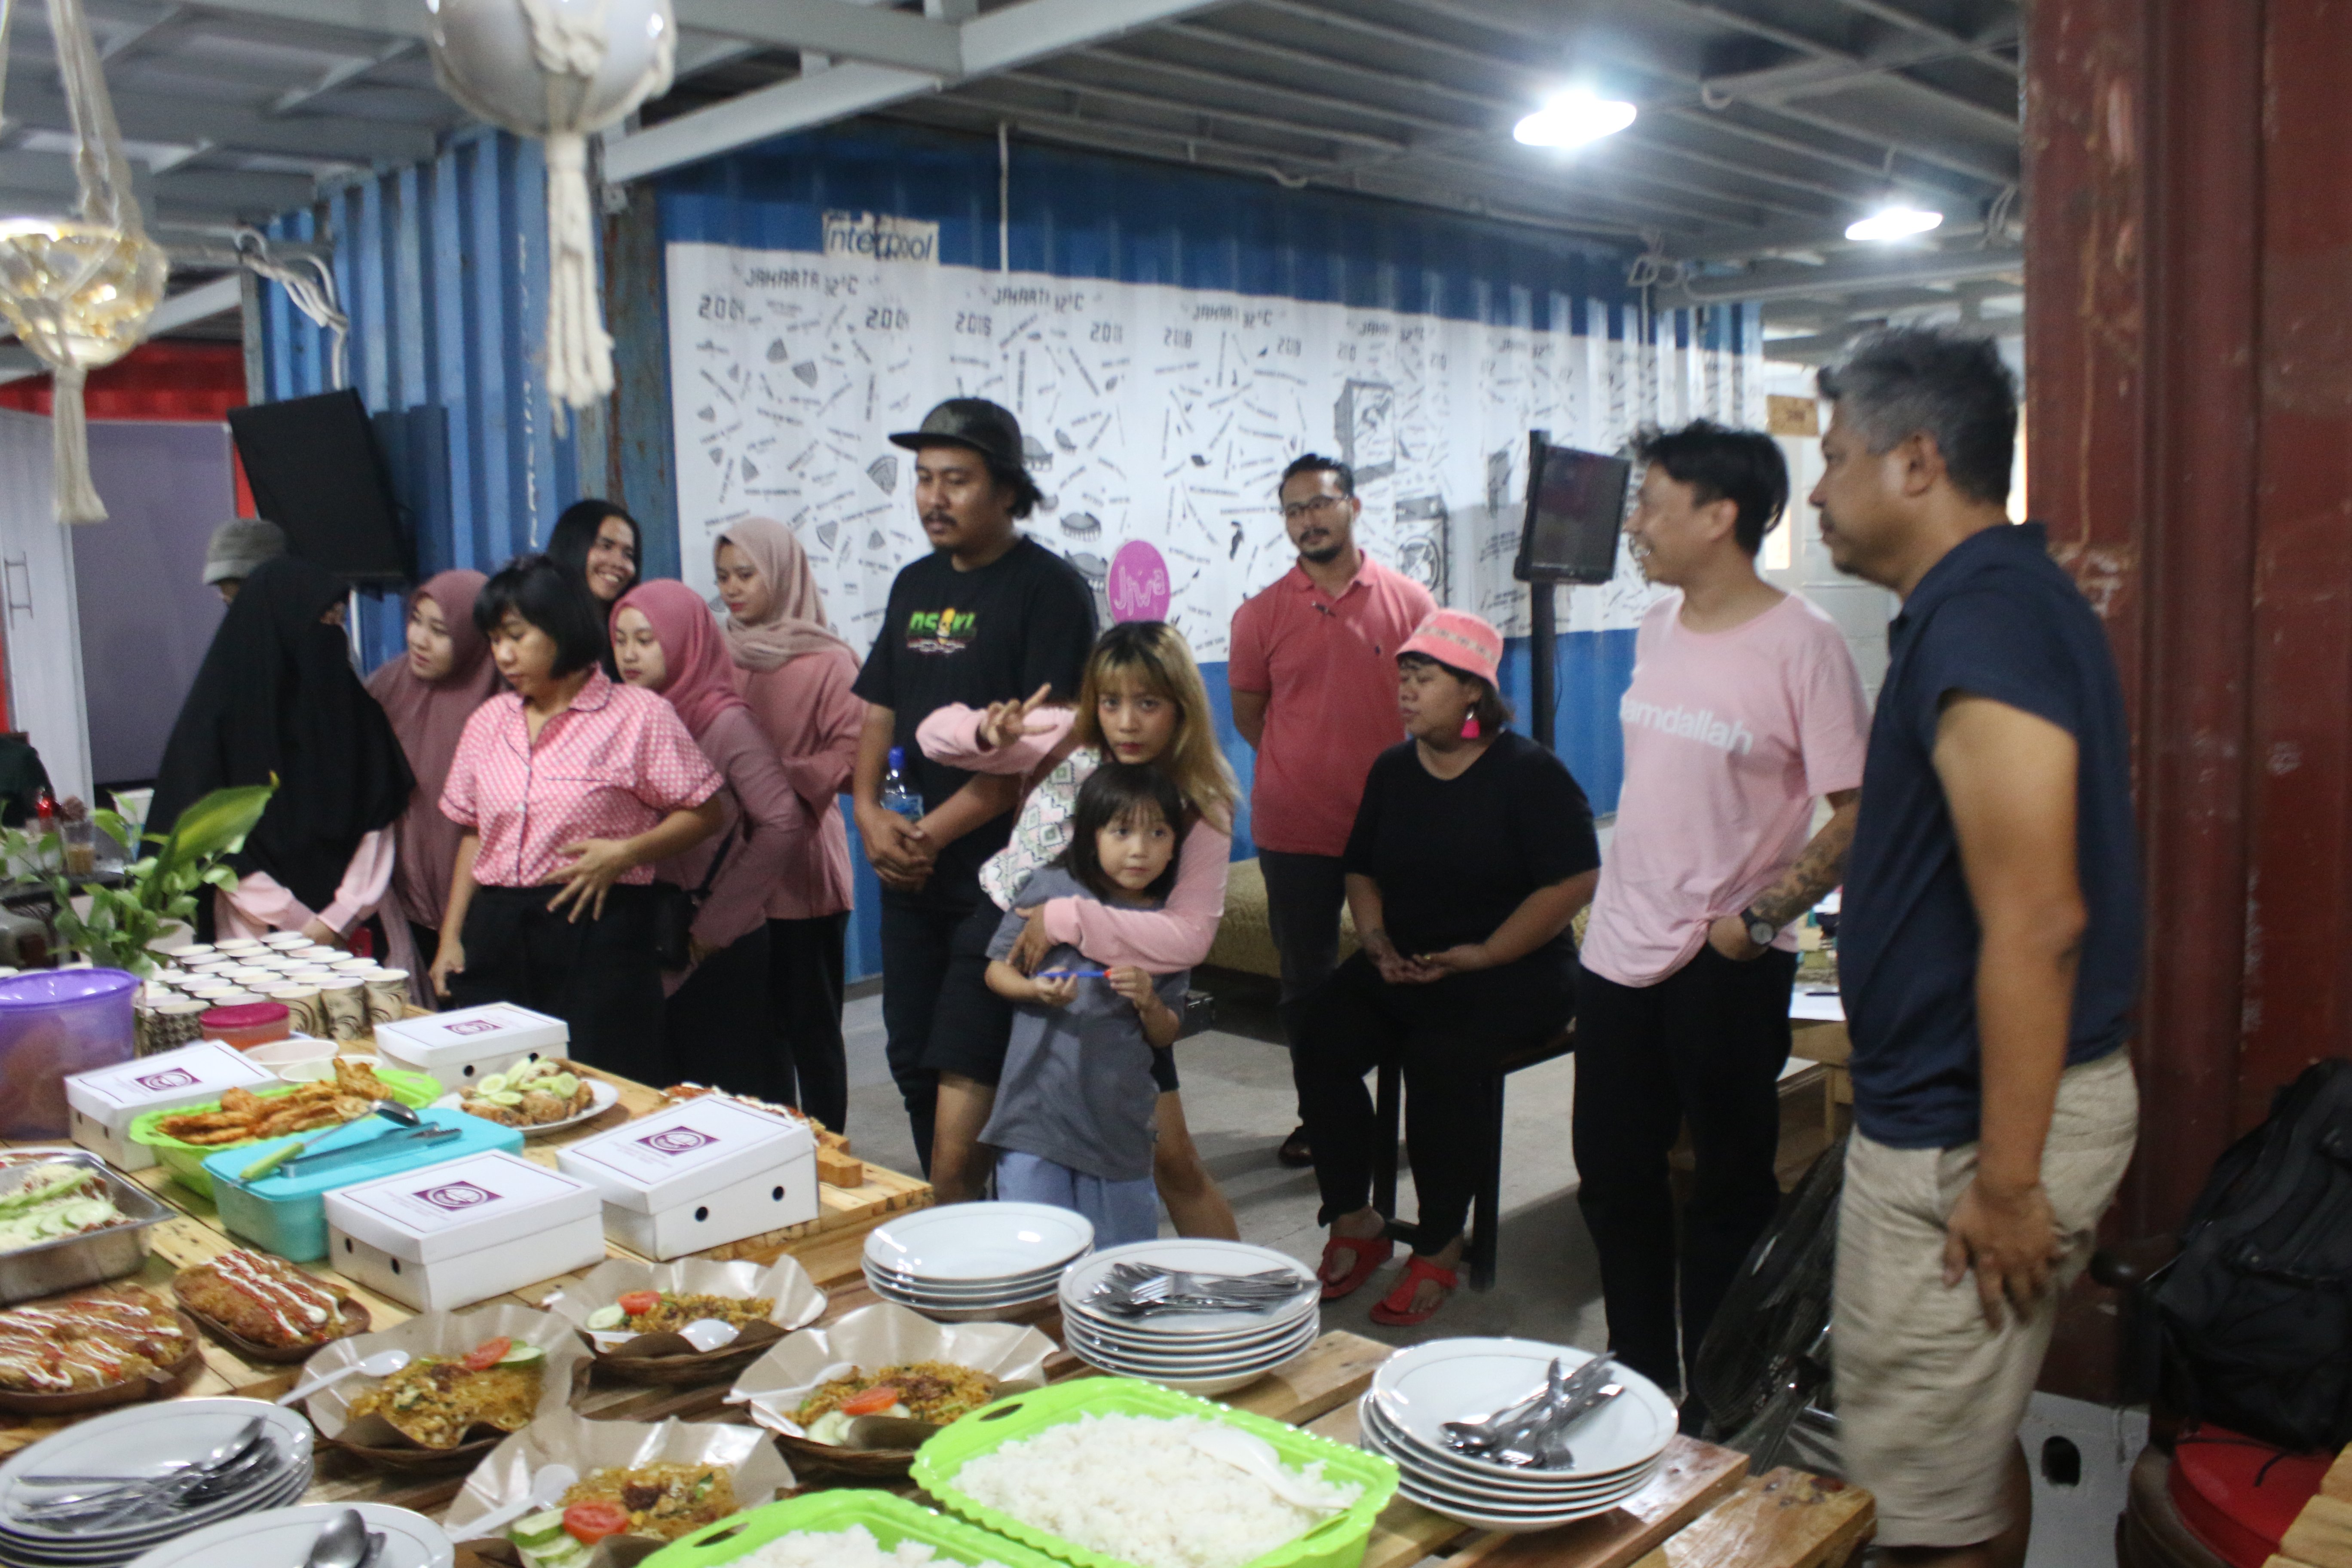 Gudskul members standing around a table filled with food. One person is holding up a v peace sign looking directly at the camera.